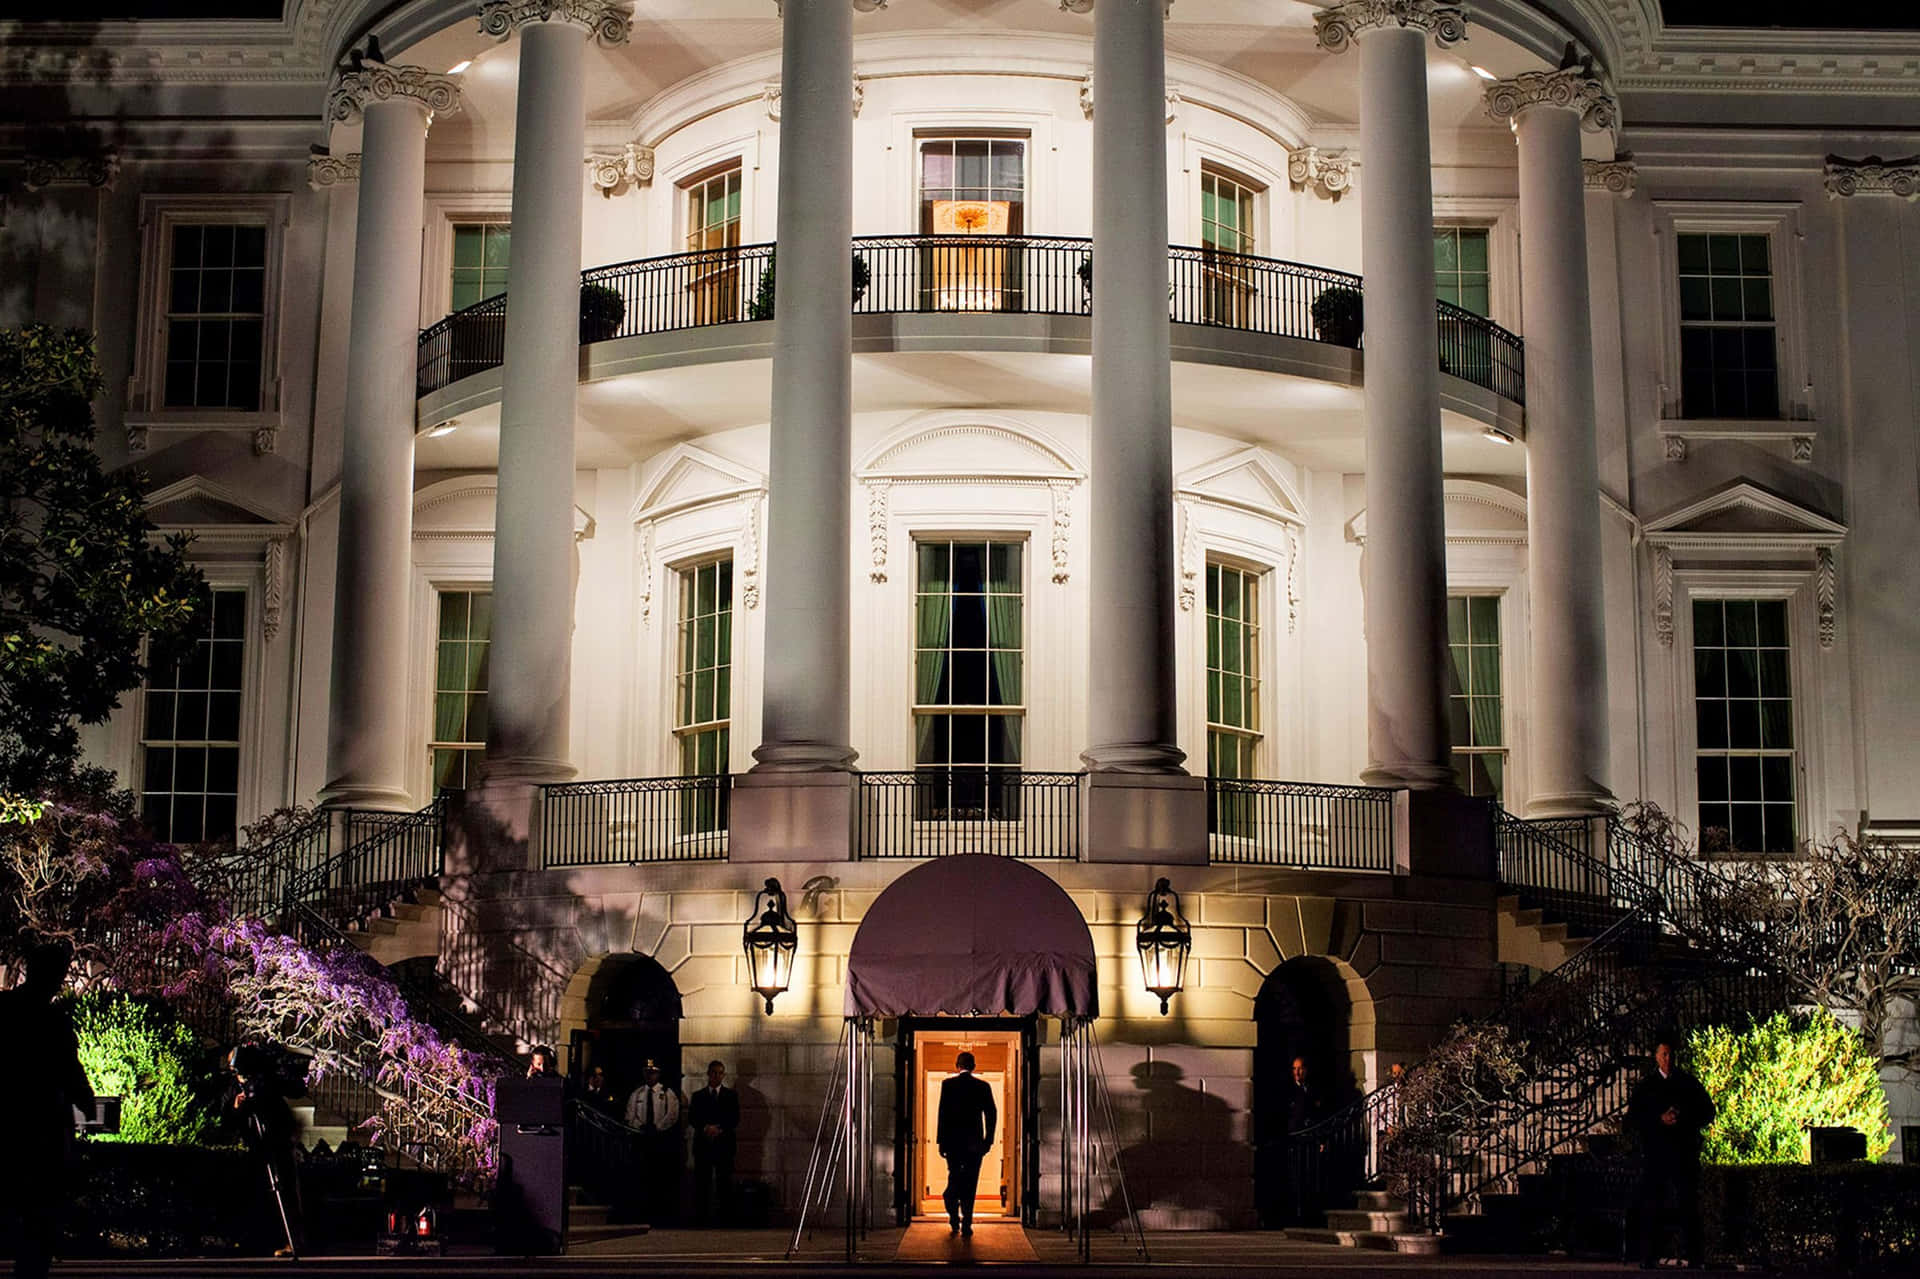 A picture of the iconic White House in Washington, DC.